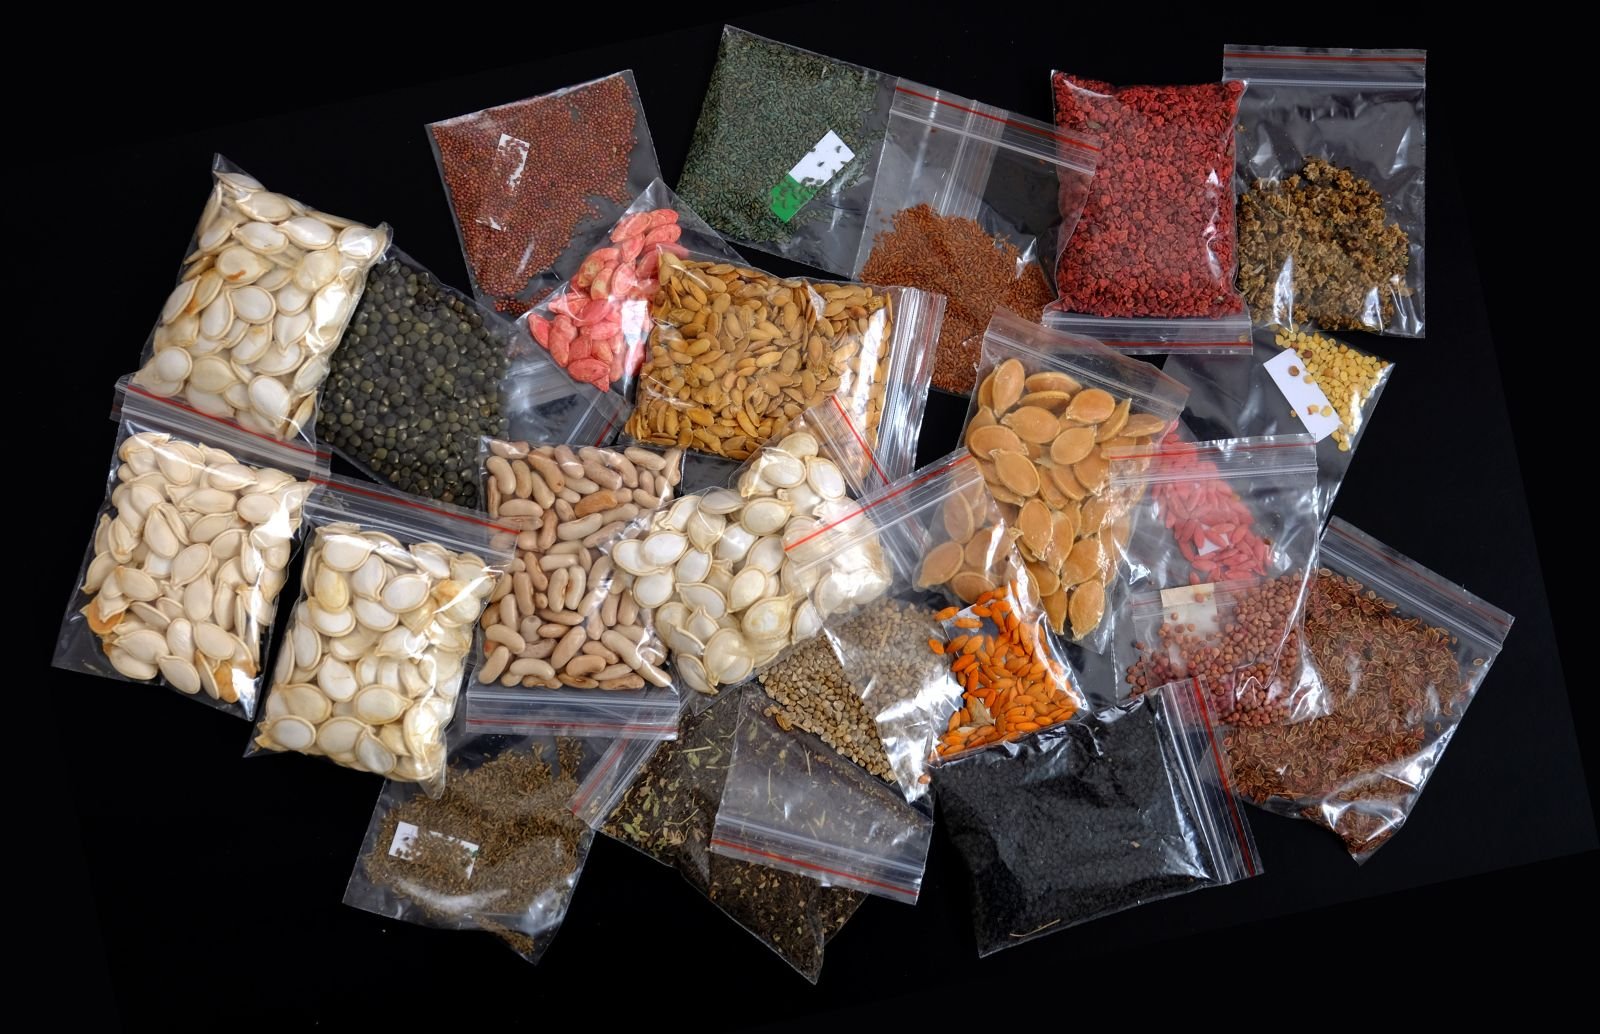 a variety of spices and nuts in plastic bags